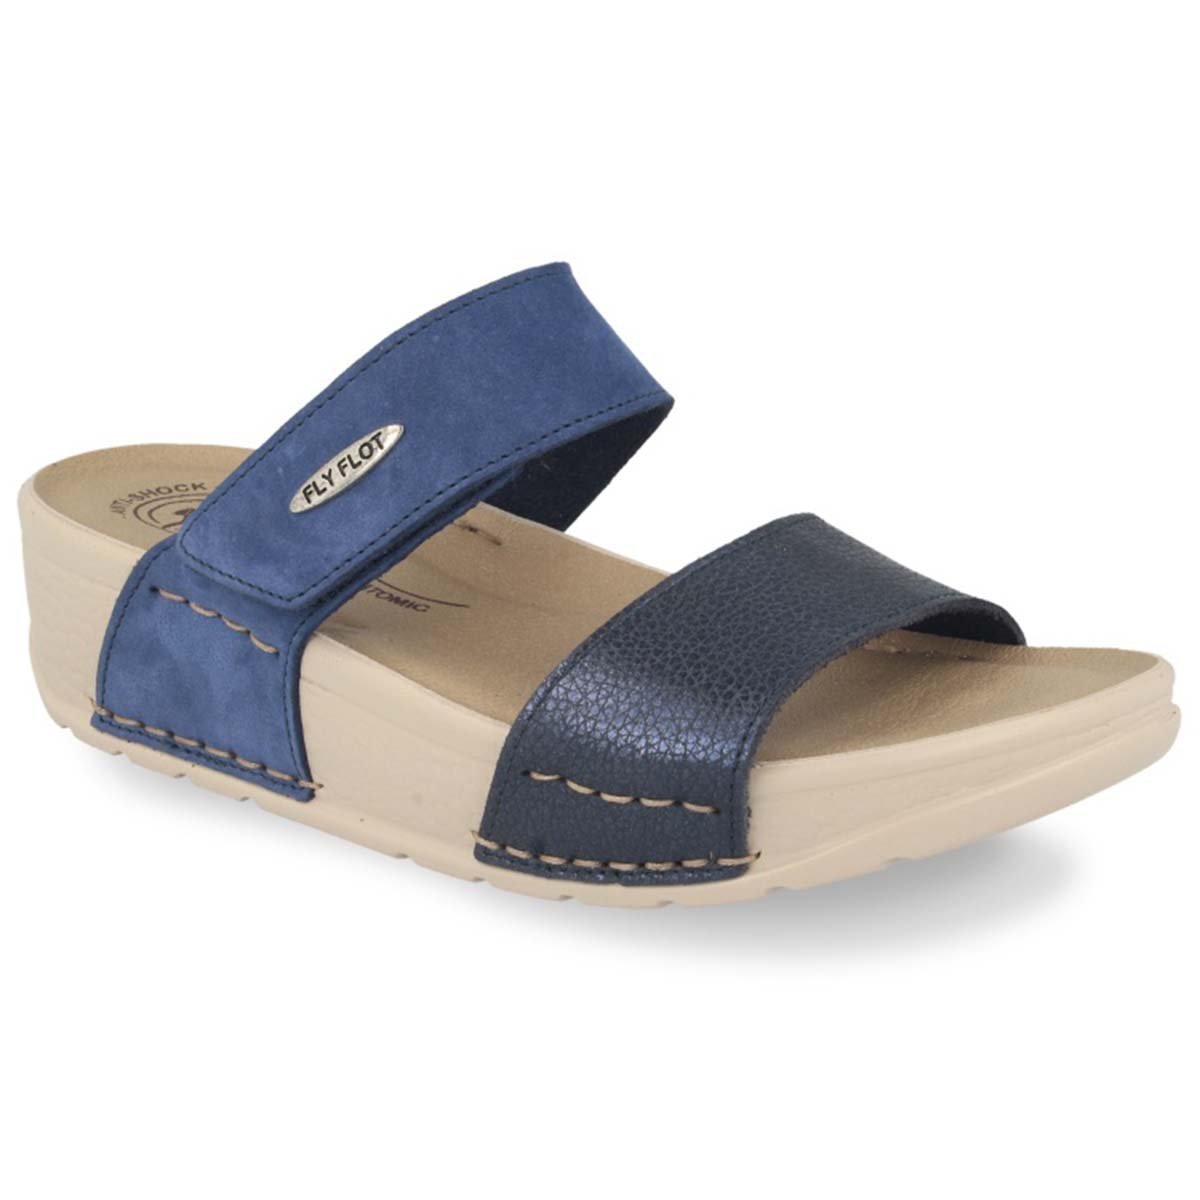 See the Velcro Leather Two Strap Slide Women Sandals With Faux Leather Insole in the colour BLUE, available in various sizes